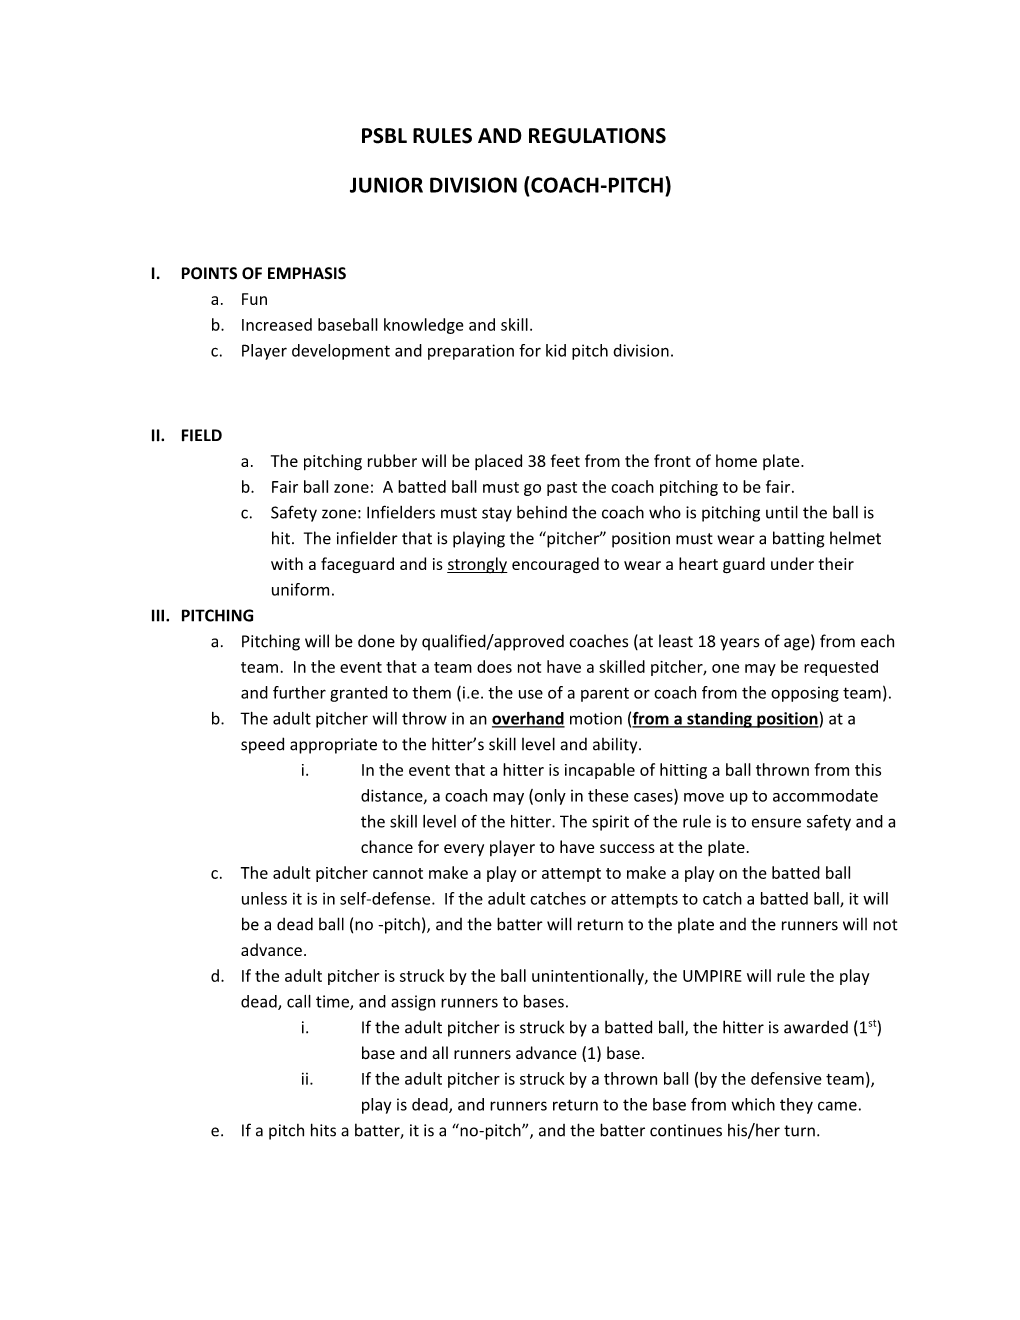 Psbl Rules and Regulations Junior Division (Coach-Pitch)